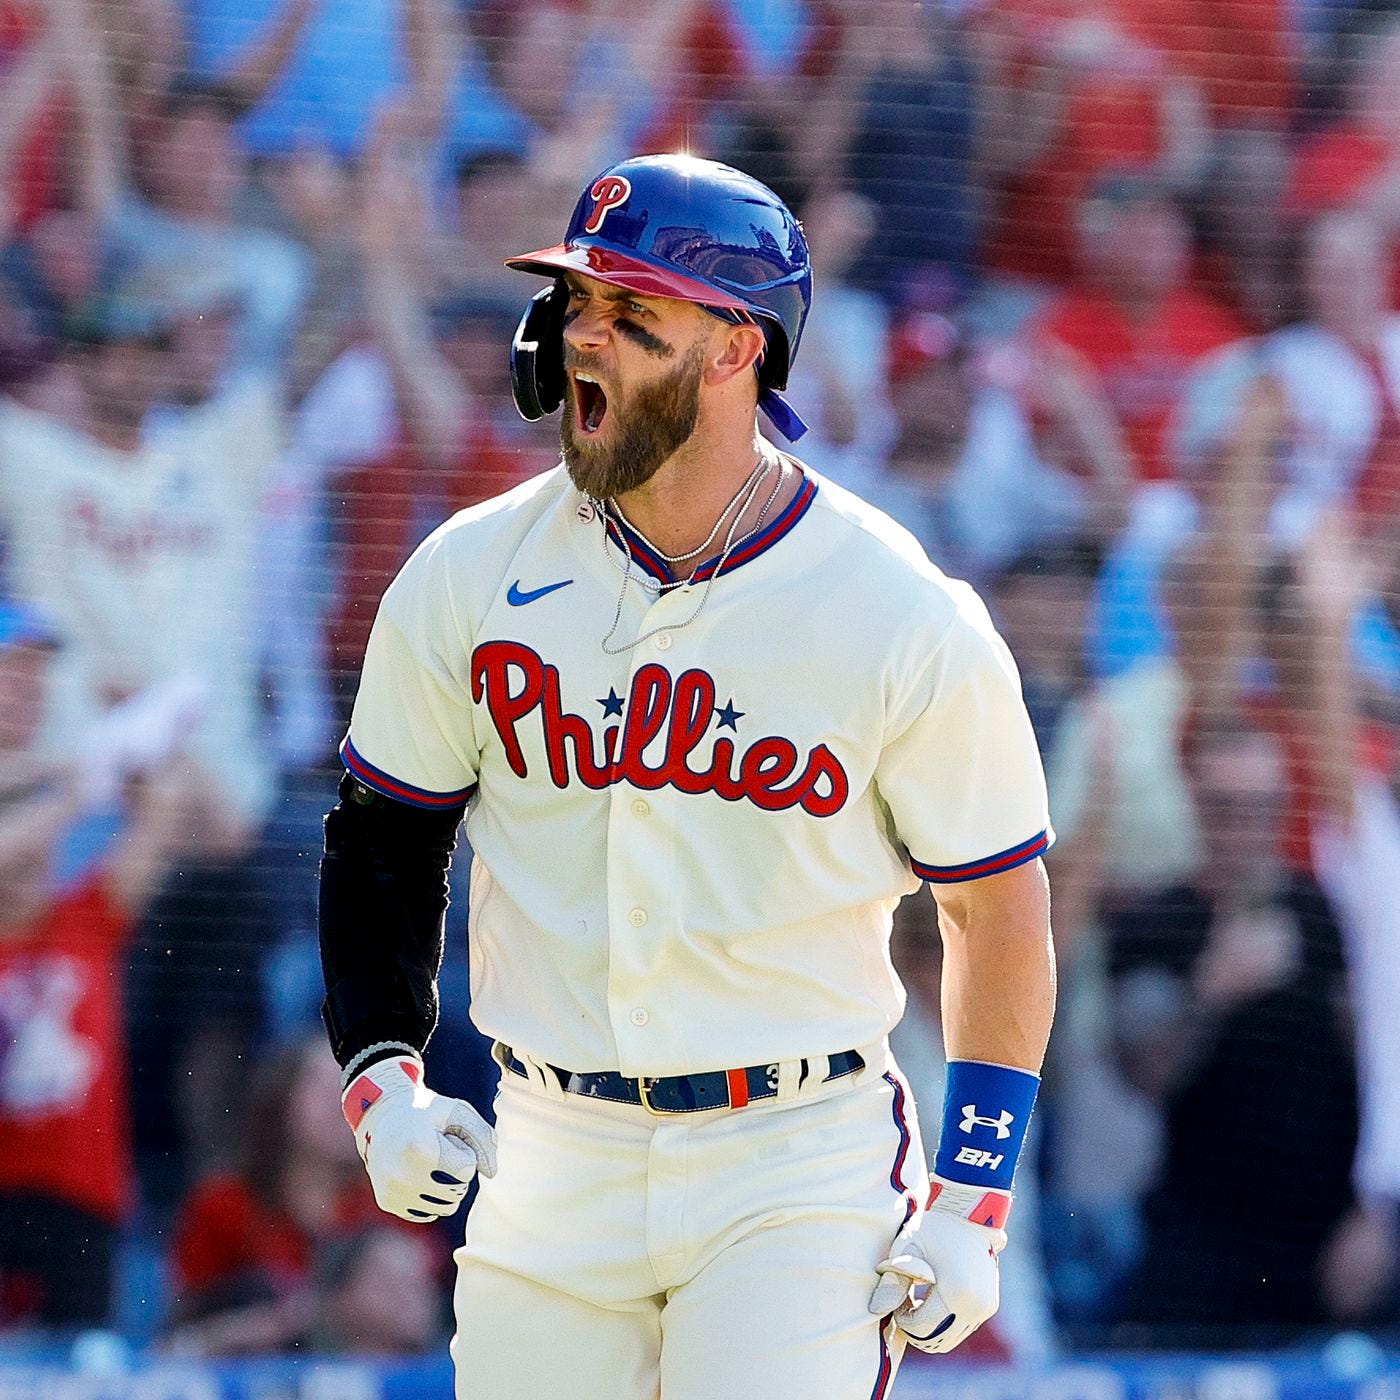 Bryce Harper's Phillies Jersey Becomes Most Sold of All Time after